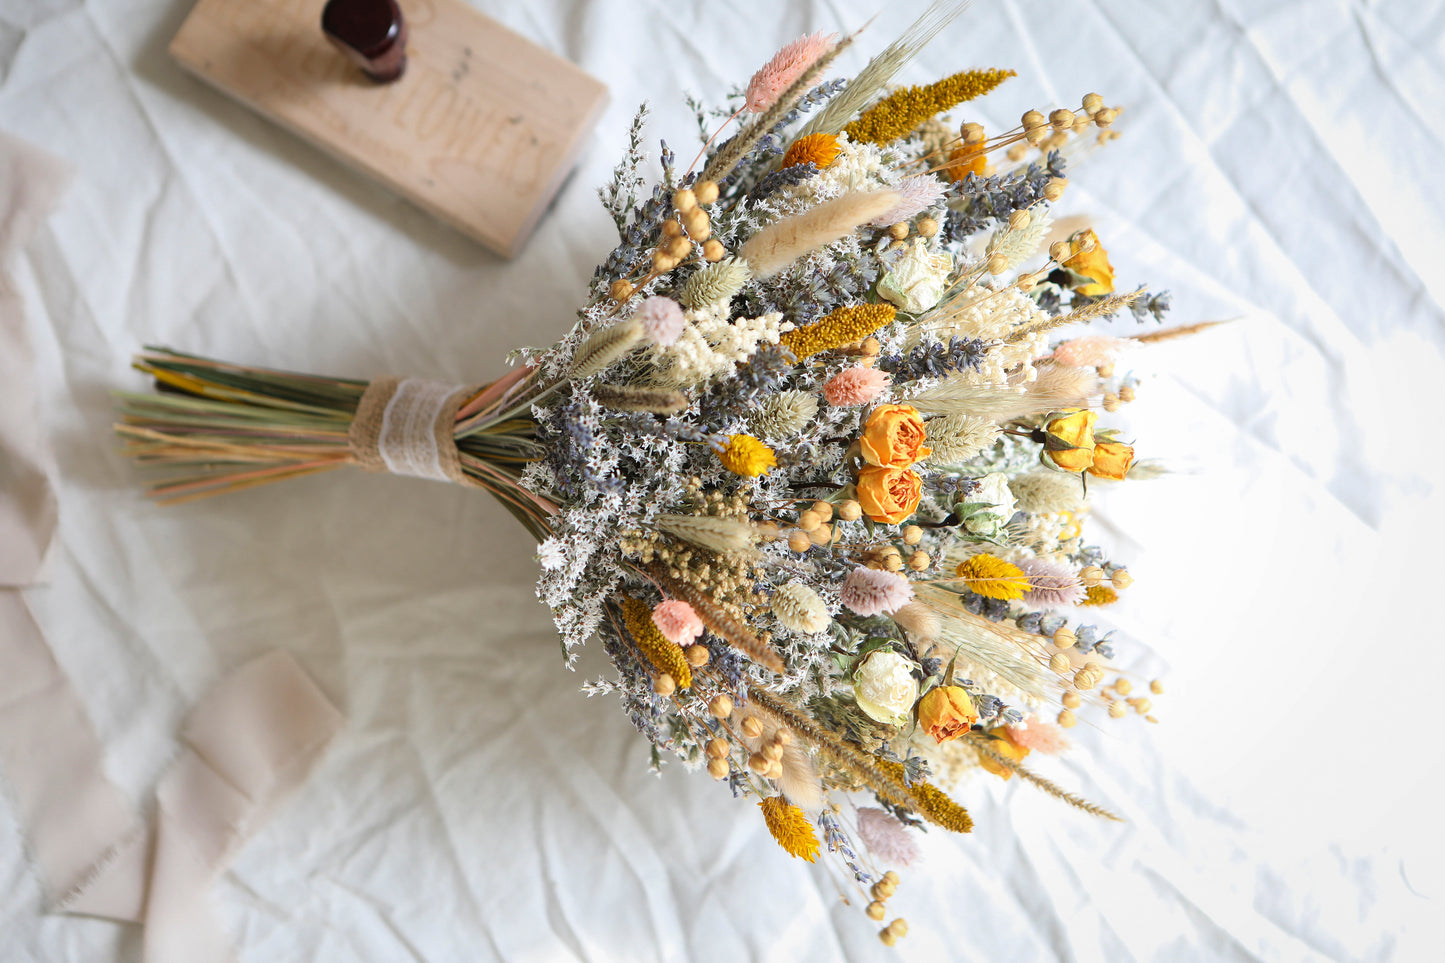 Rustic Yellow Bouquet